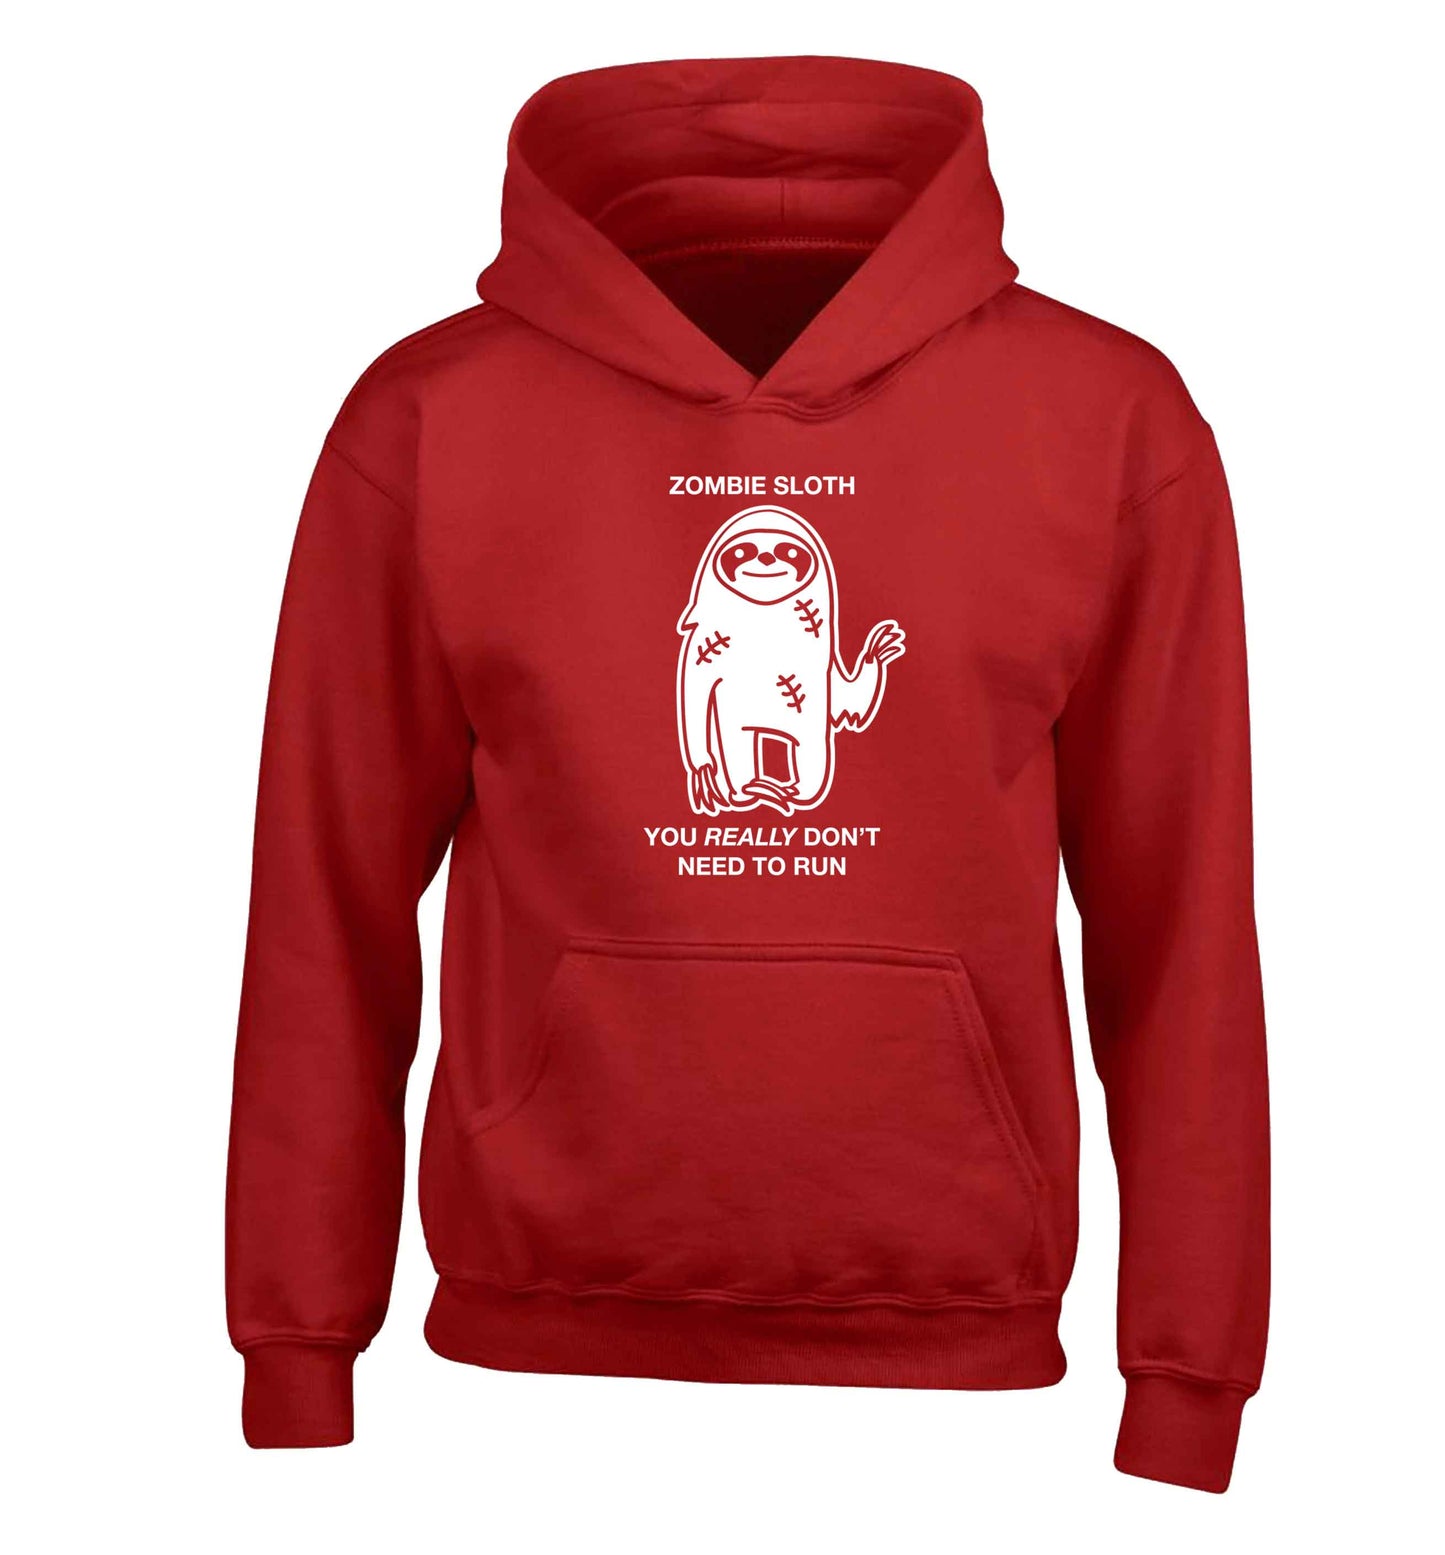 Zombie sloth you really don't need to run children's red hoodie 12-13 Years